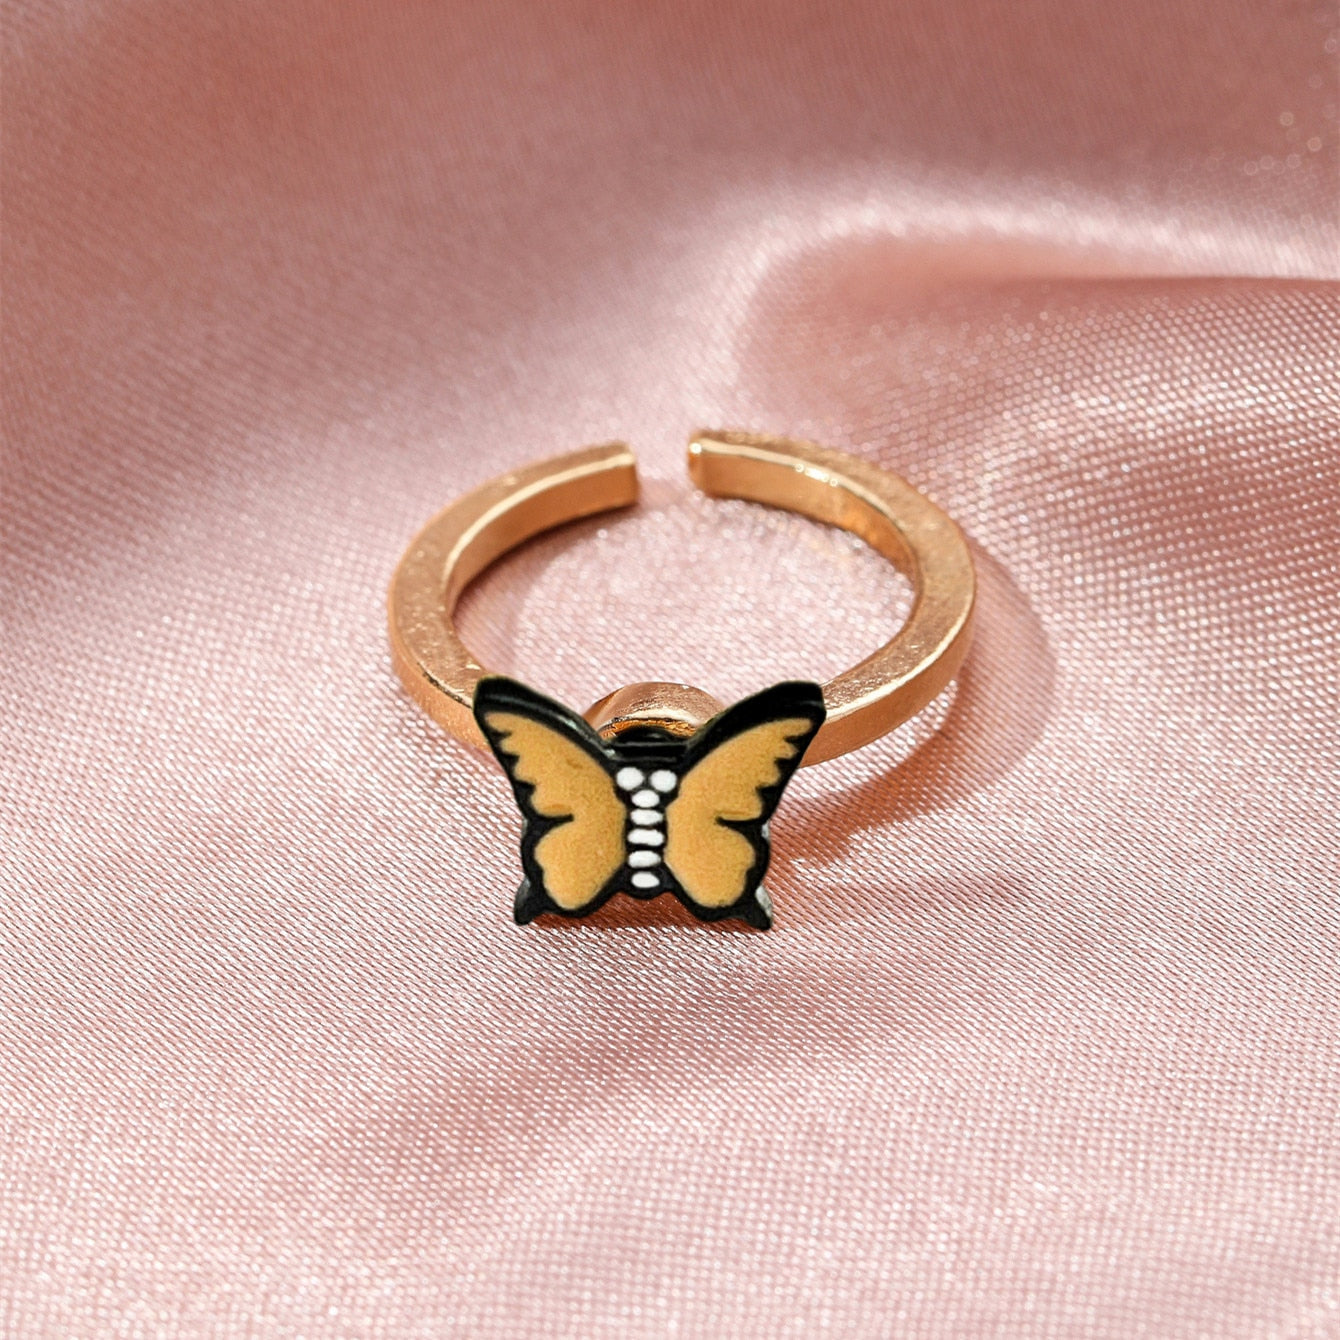 Butterfly anxiety ring thejoue